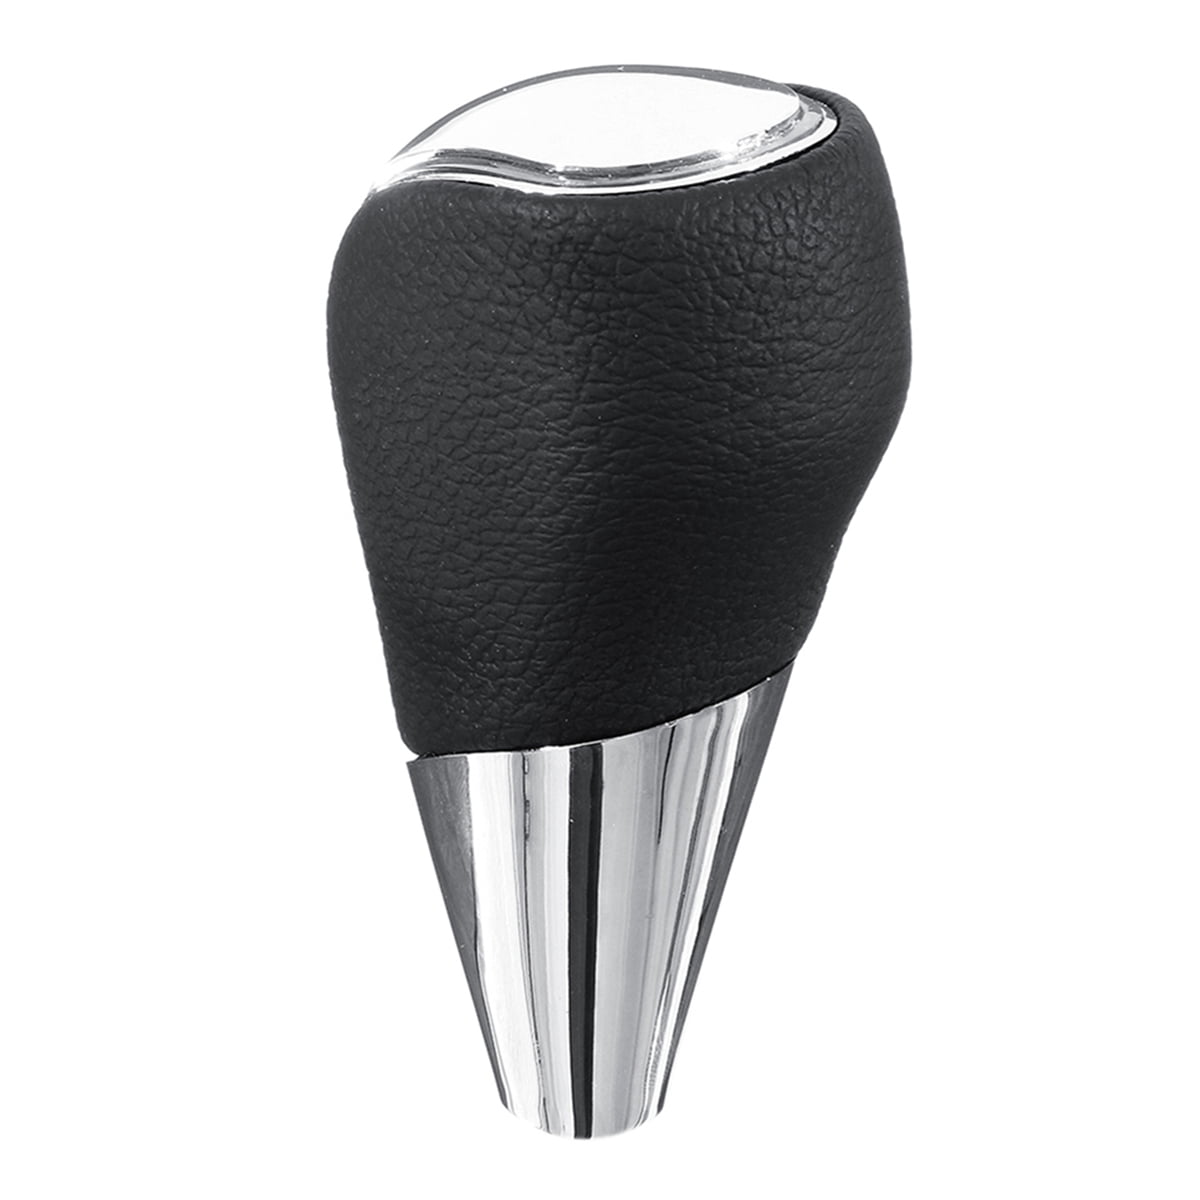 ZhengRong Black Leather Touch Motion Activated LED Light Auto Car Shift Knob Shifter Gear Car Logo Shift Knob with USB Charger for Lexus